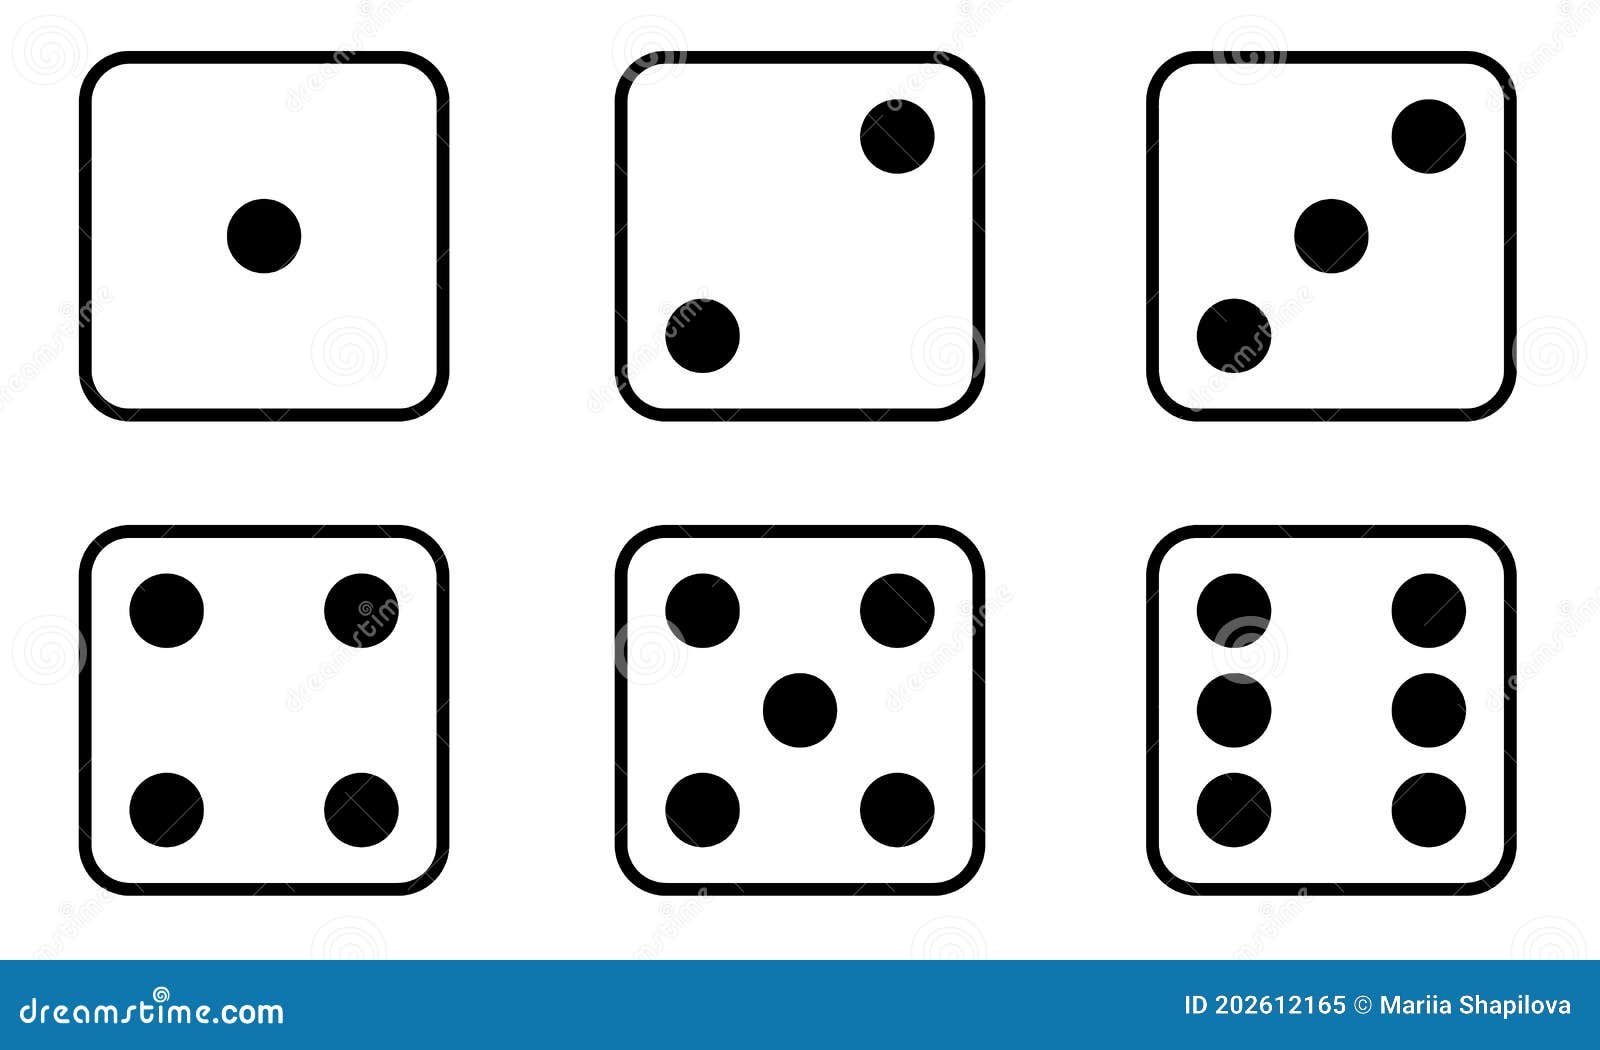 free-printable-dice-template-with-dots-printable-templates